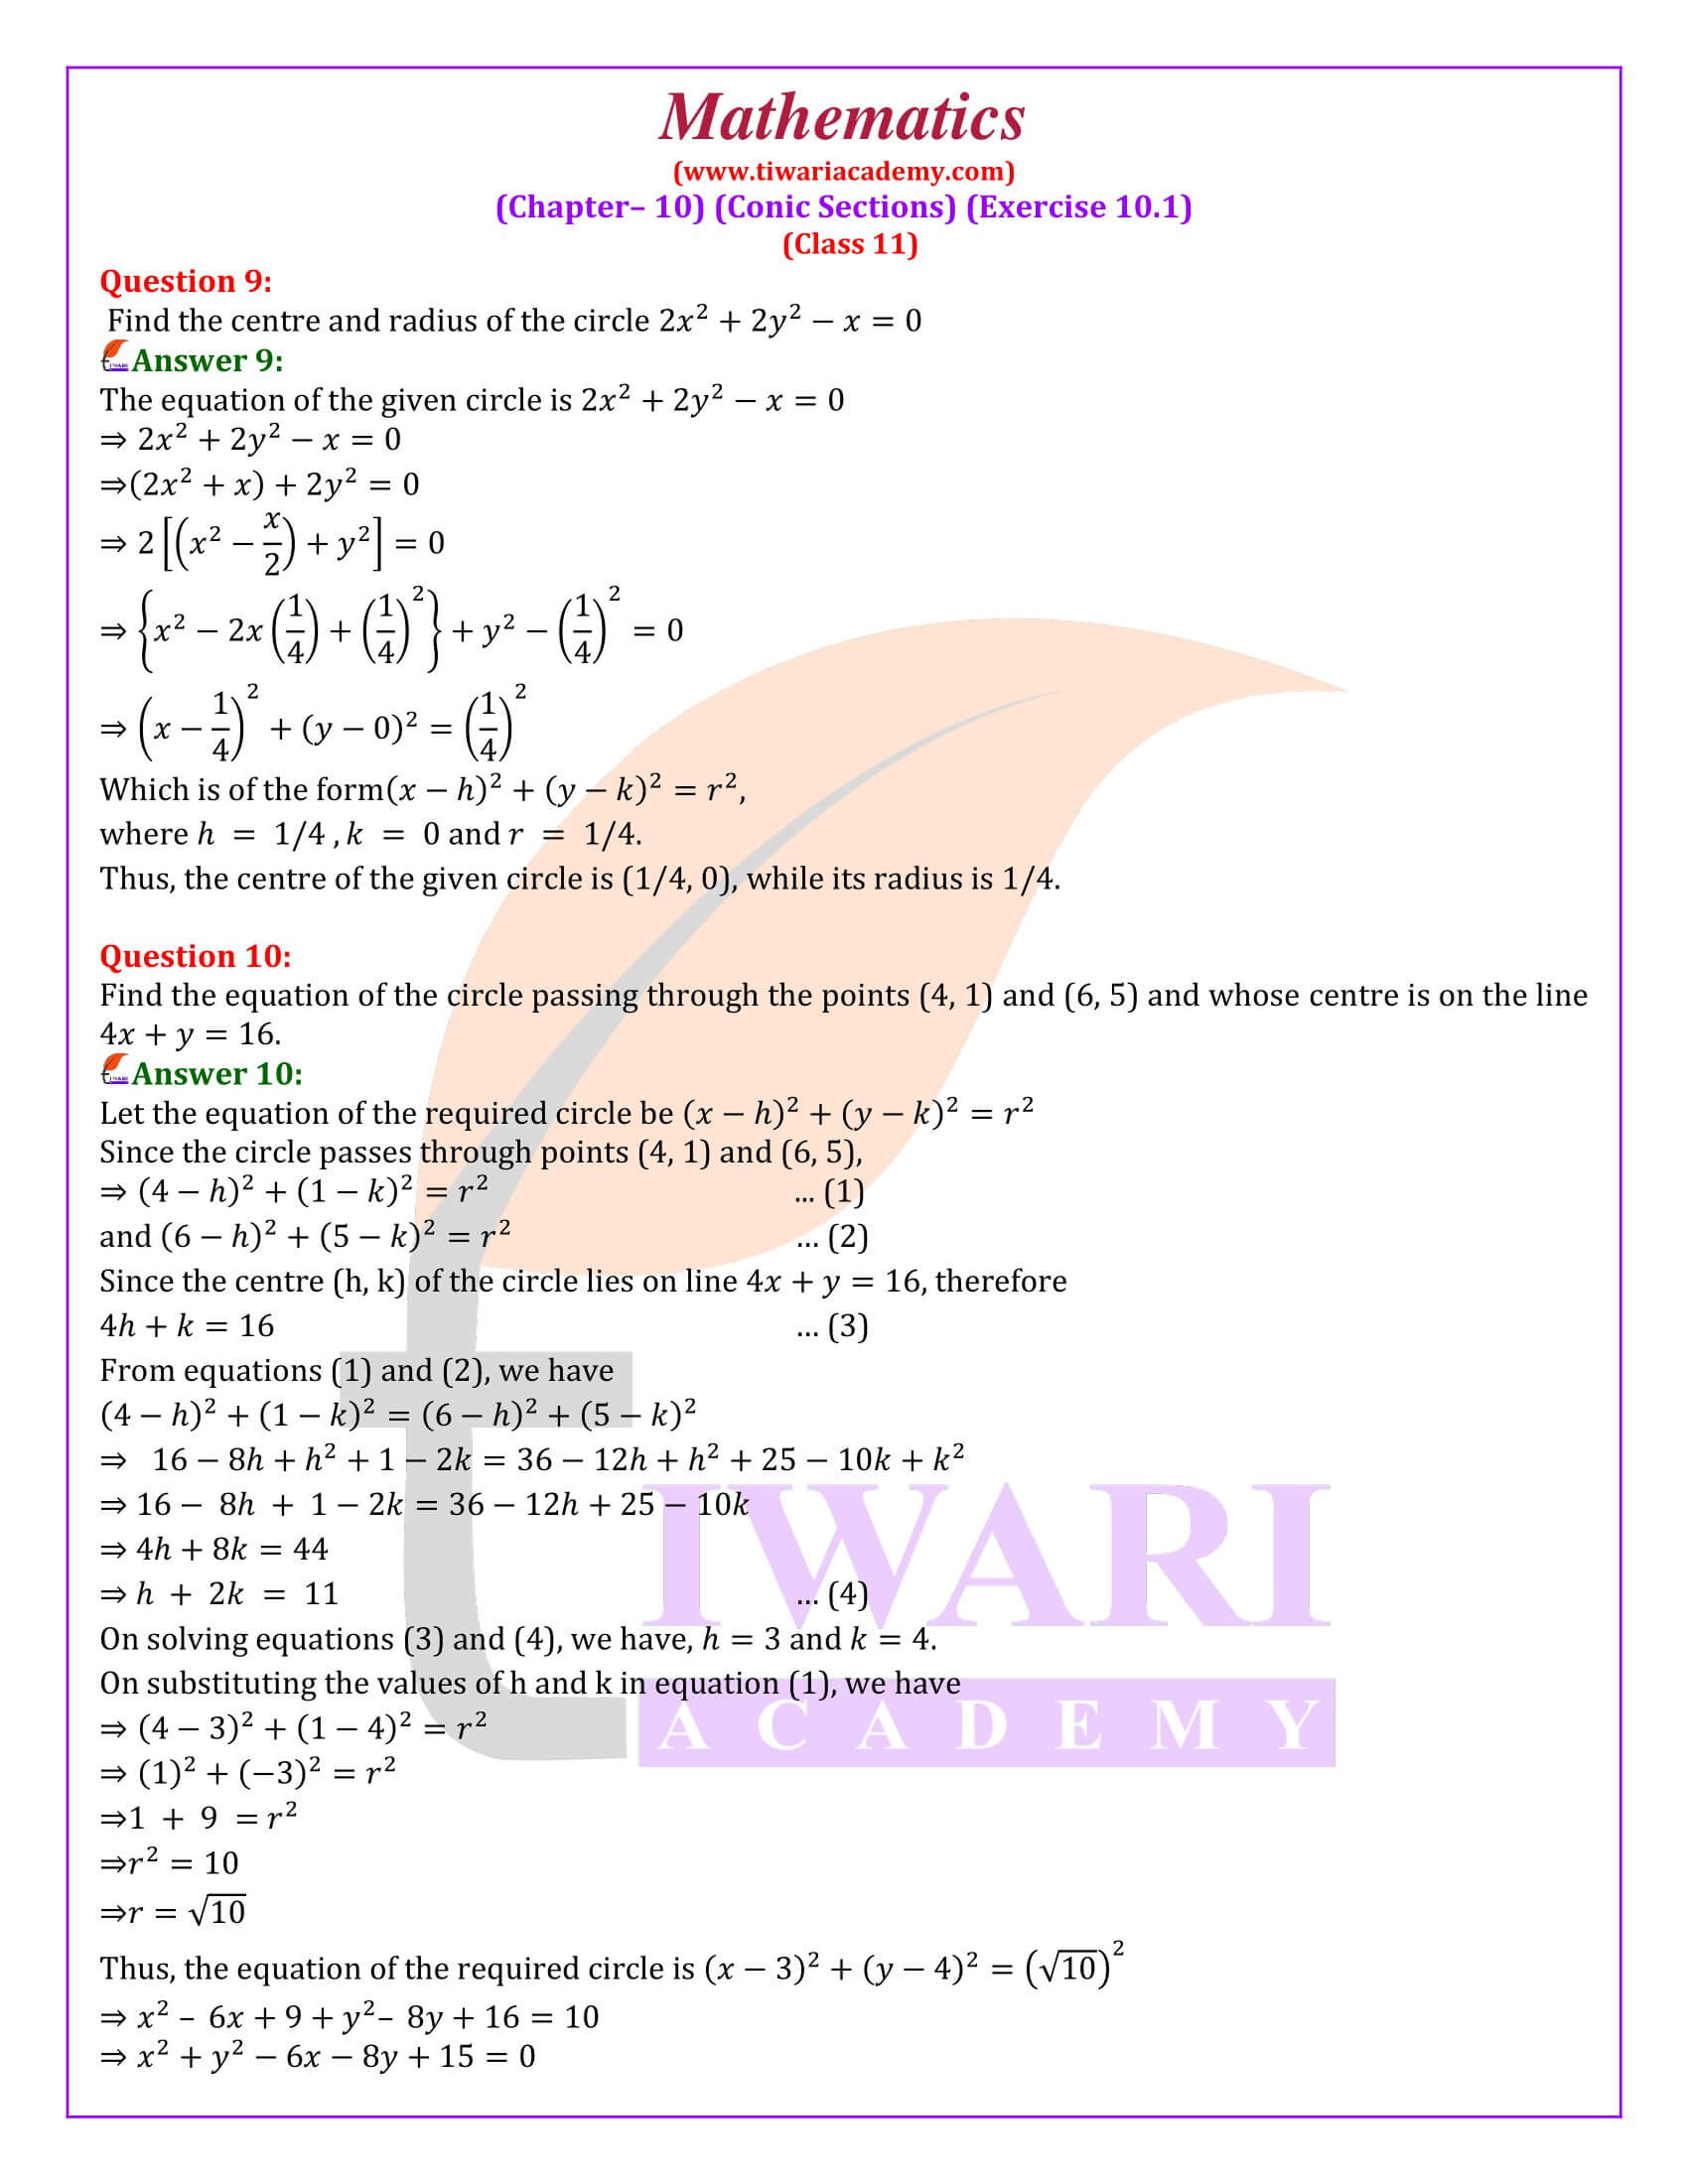 Class 11 Maths Chapter 10 Exercise 10.1 solutions in English